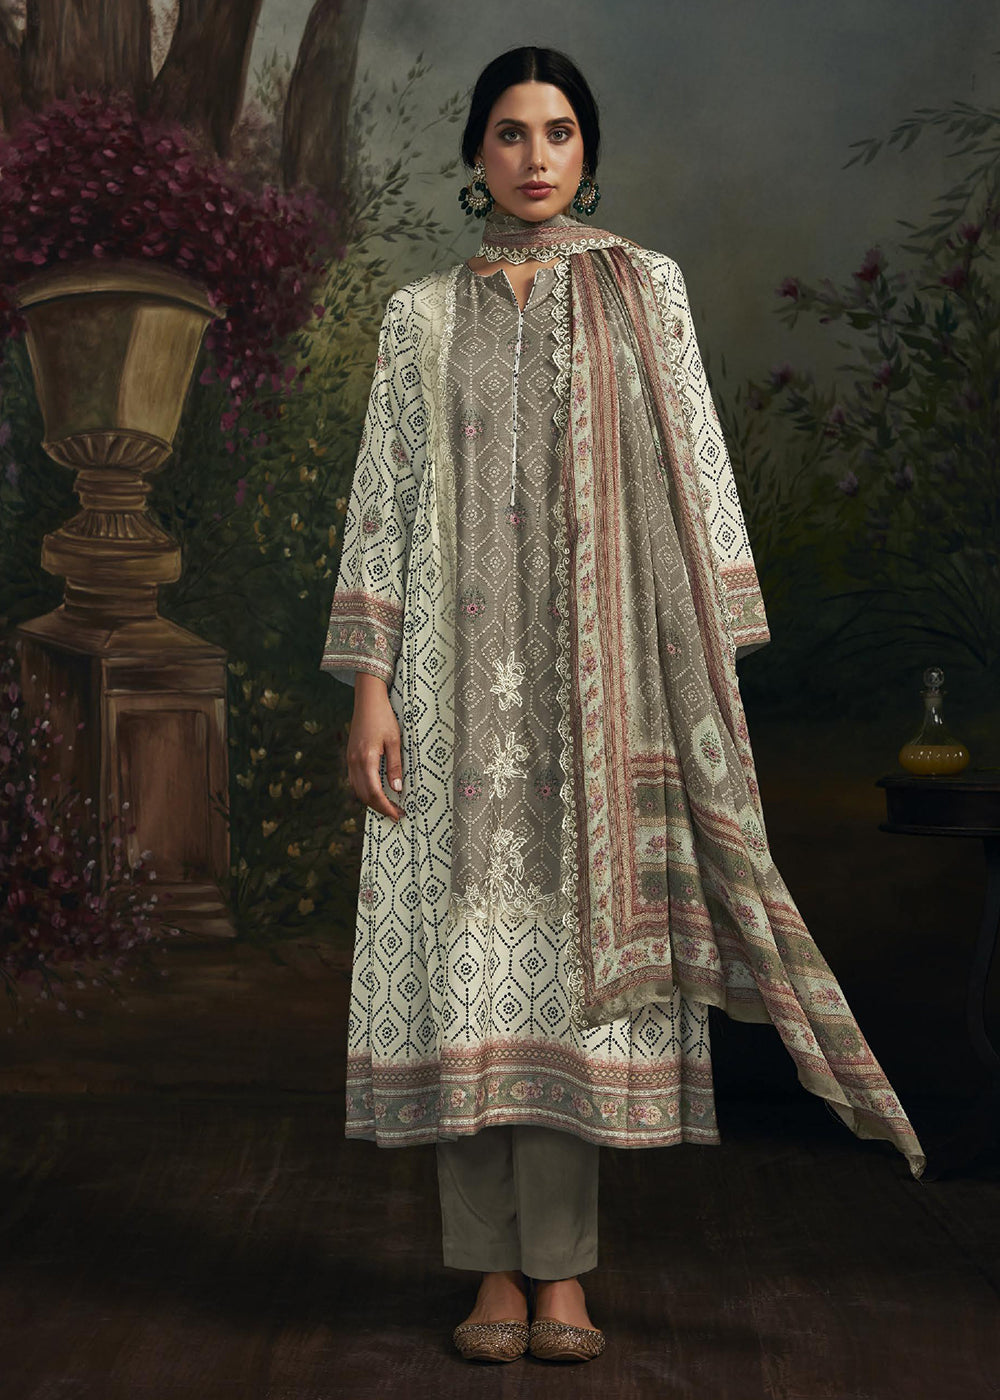 Buy Now Pakistani Style Off White Digital Printed Salwar Suit Online in USA, UK, Canada, Germany, Australia & Worldwide at Empress Clothing. 